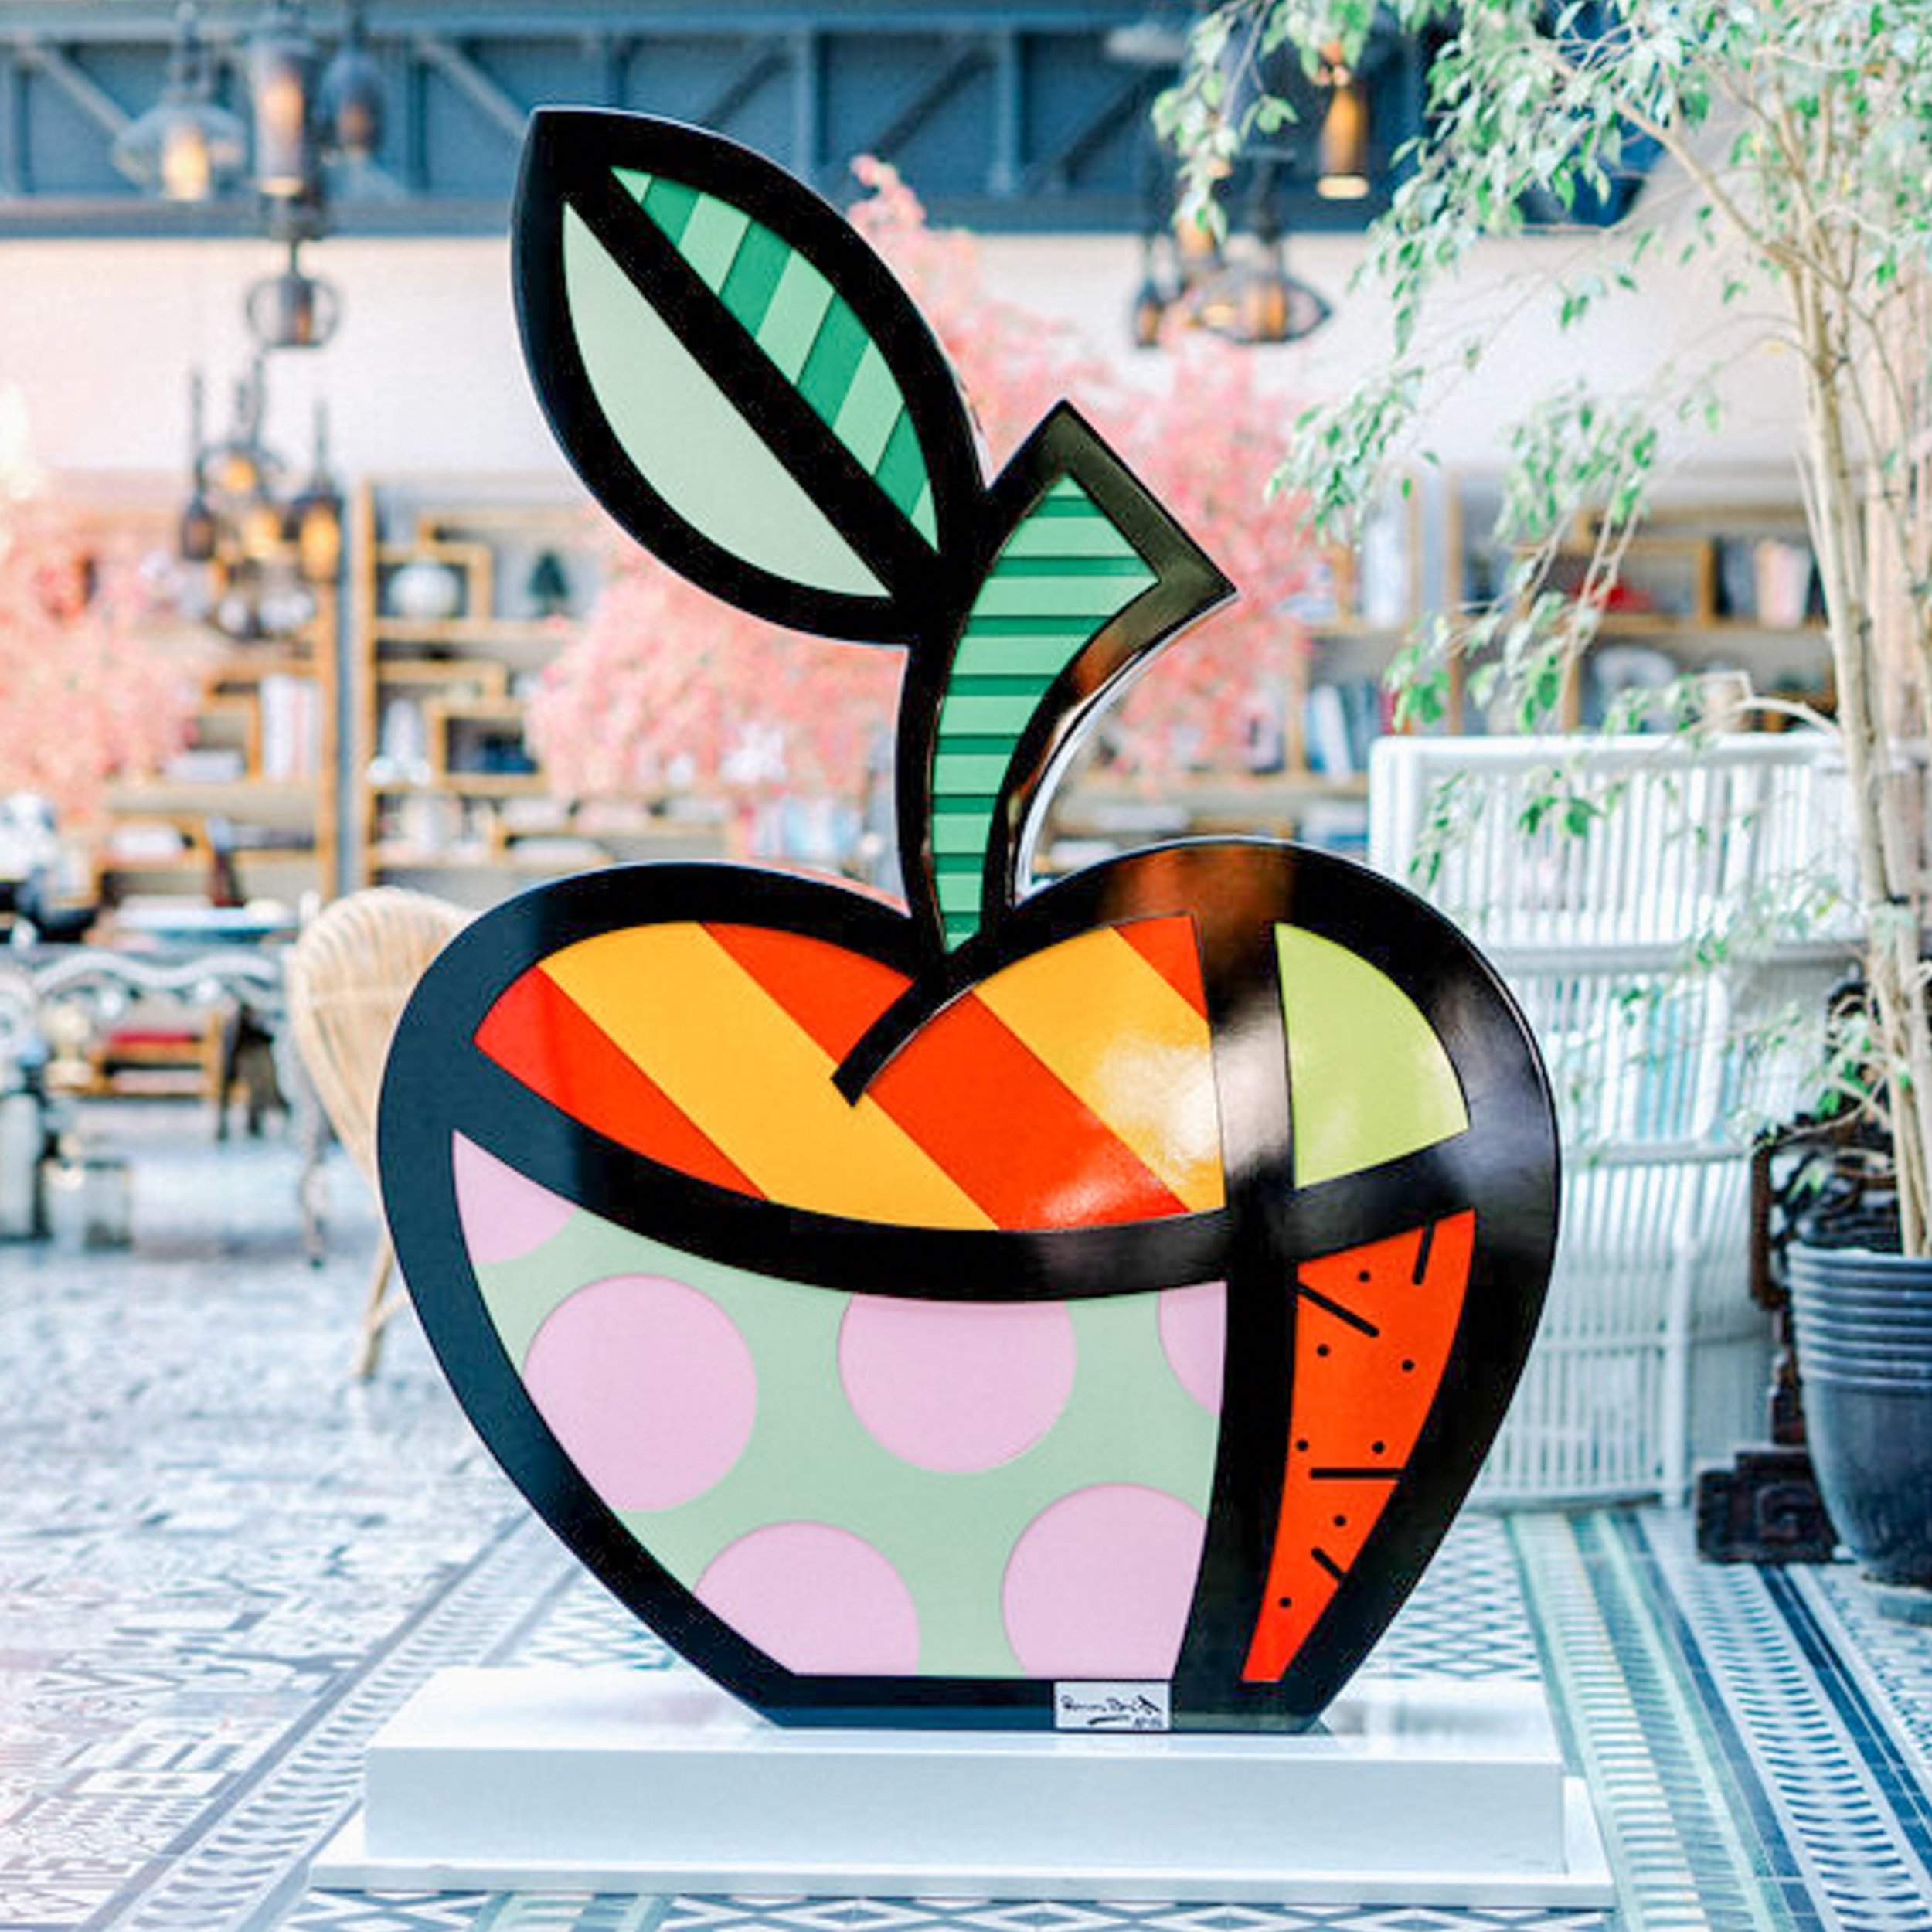 &lsquo;Big Apple&rsquo; &ndash; a vibrant masterpiece in our Winter Garden created by none other than the legendary Romero Britto.

Britto&rsquo;s distinctive style is like a magnet, drawing in both youthful spirits and art connoisseurs with its mesm